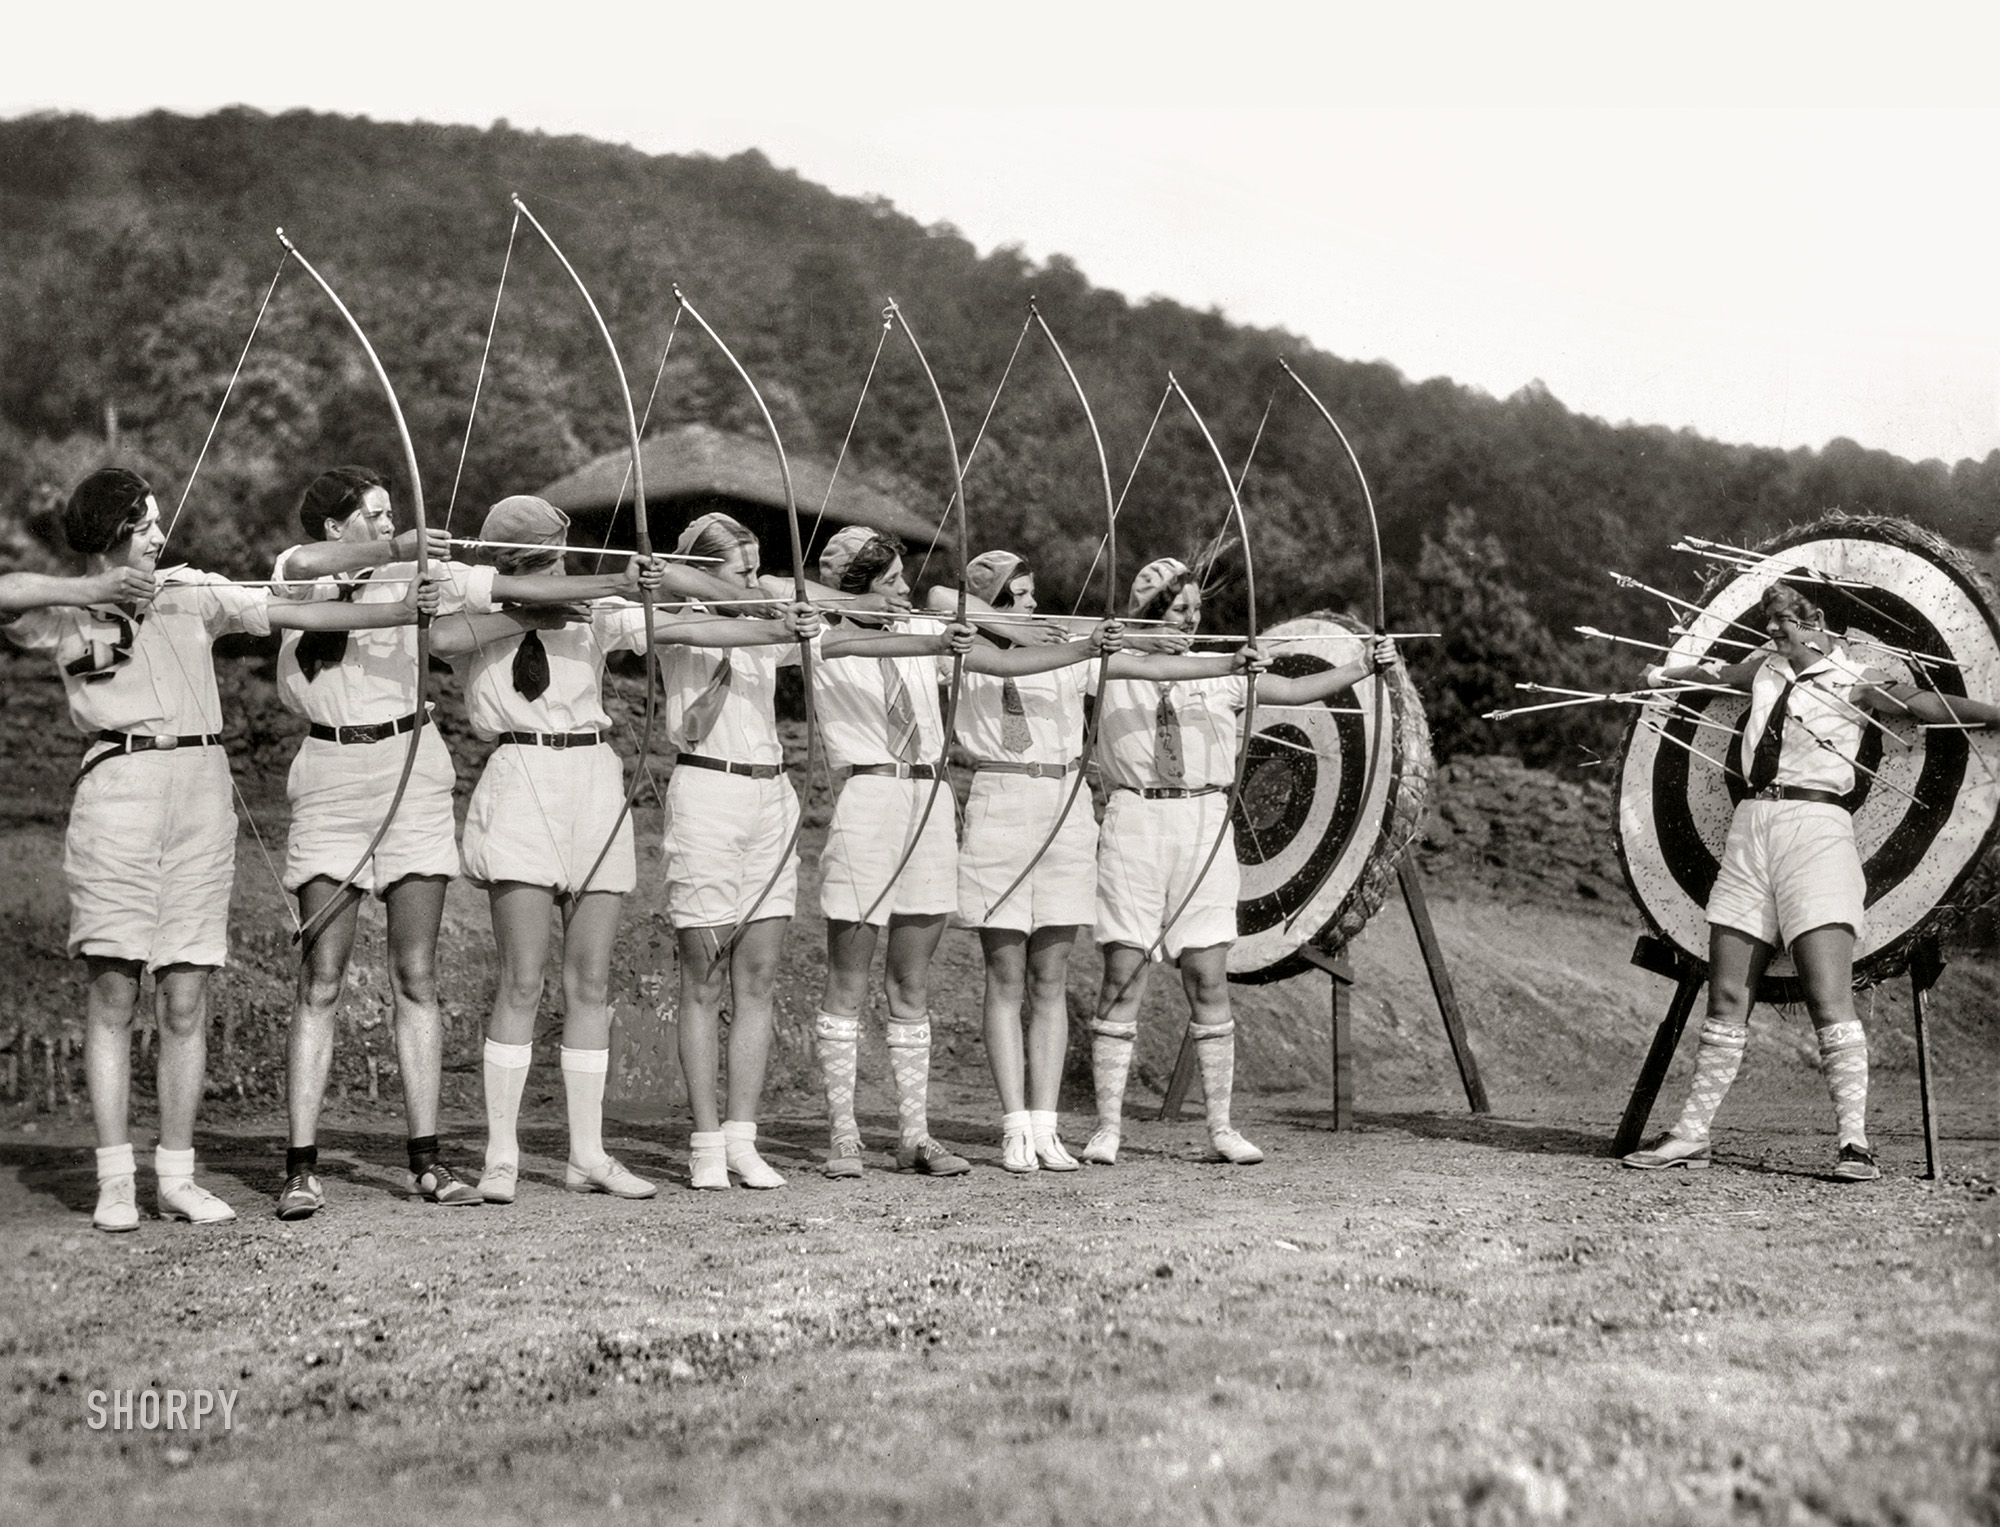 &nbsp; &nbsp; &nbsp; &nbsp; "Girl archers from Camp Greystone, Tuxedo, N.C., demonstrate fancy shooting attired in latest fashion for the bow and arrow sport -- 'shorts' and sox."
August 23, 1928. "A perfect miss with every shot -- Miss Isabel Bonsack of St. Louis, Mo., has a right to feel happy that her fellow members of the Camp Greystone archery team are skillful markswomen. Miss Bonsack volunteered to act as a target during an exhibition of girl archers at the Grove Park Inn, Asheville, North Carolina." Gelatin silver print. View full size.